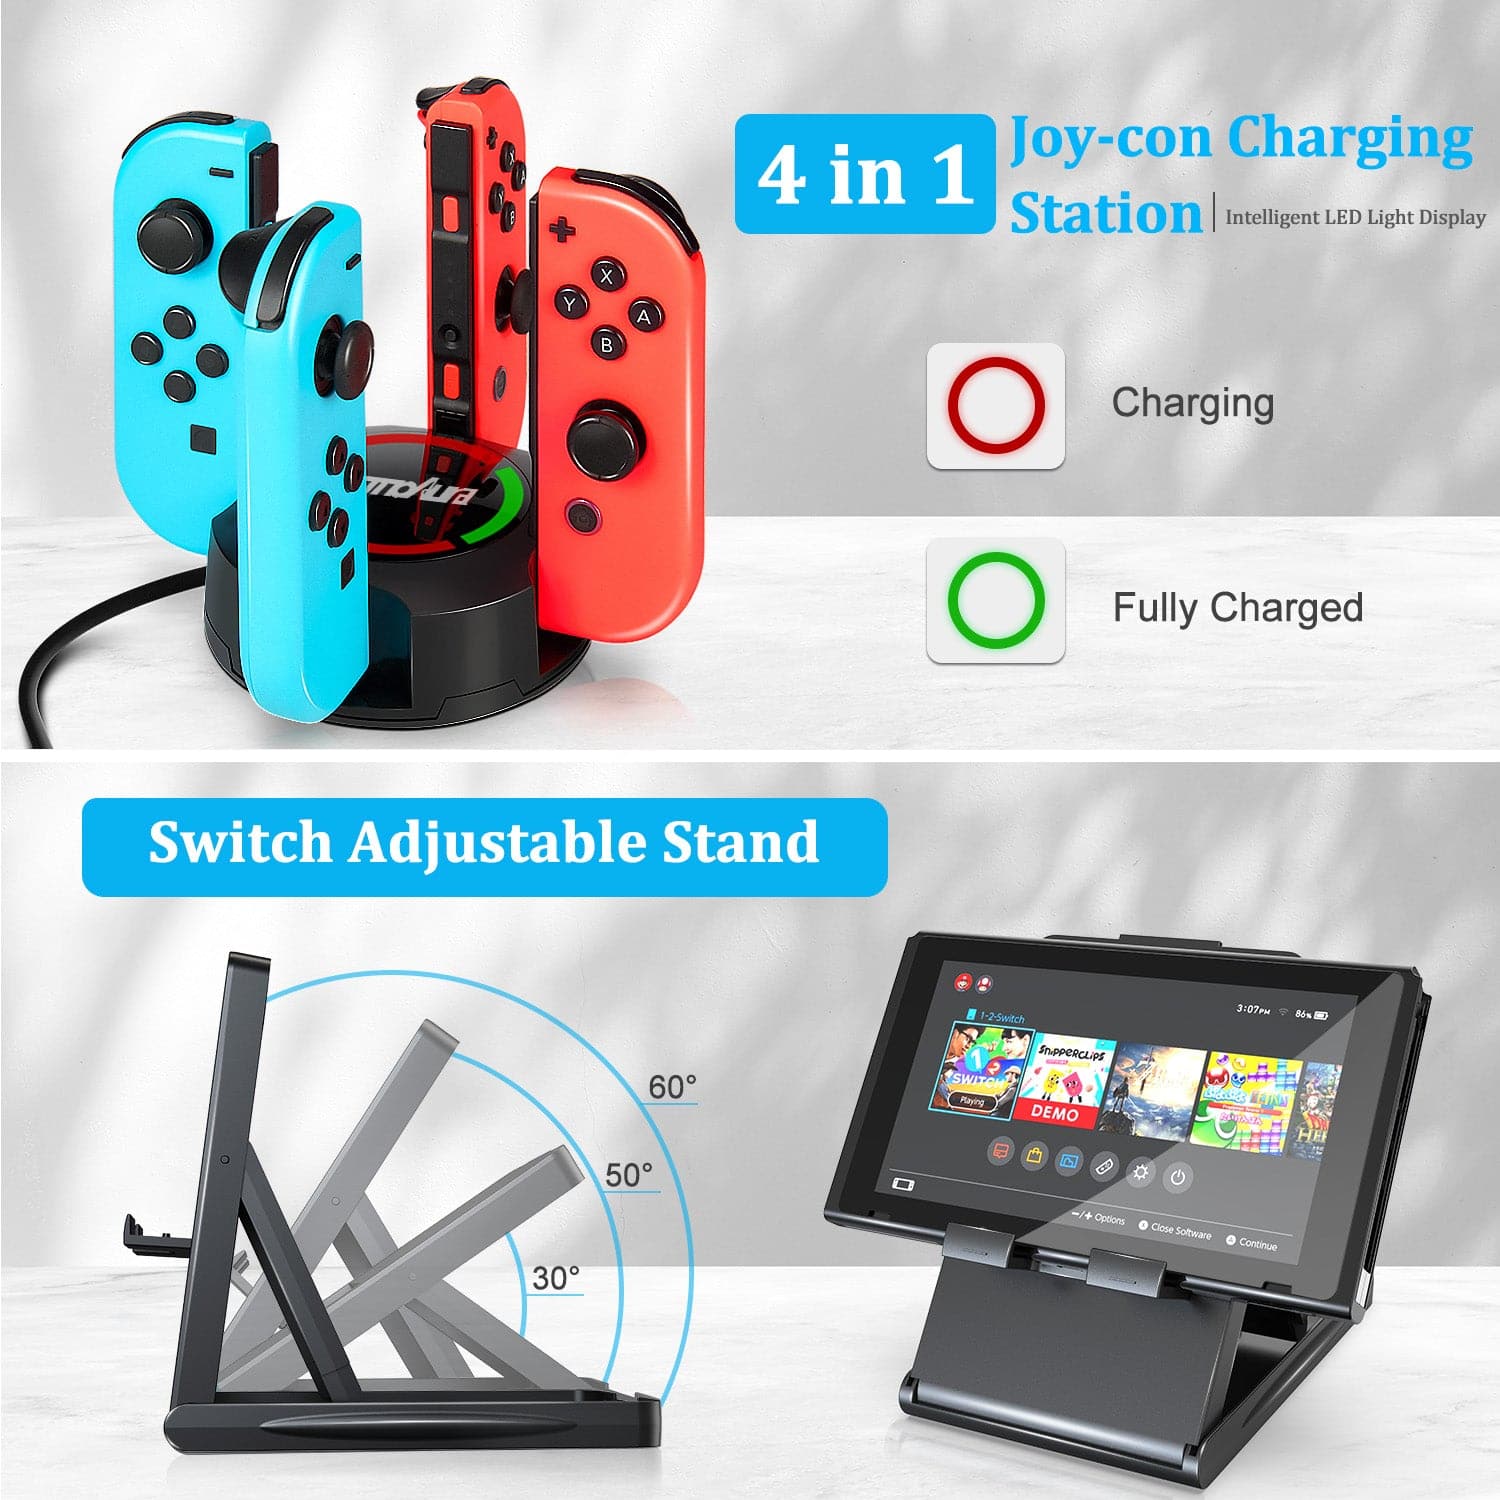 innoAura Hard Carrying Case for Switch with 20 Accessories